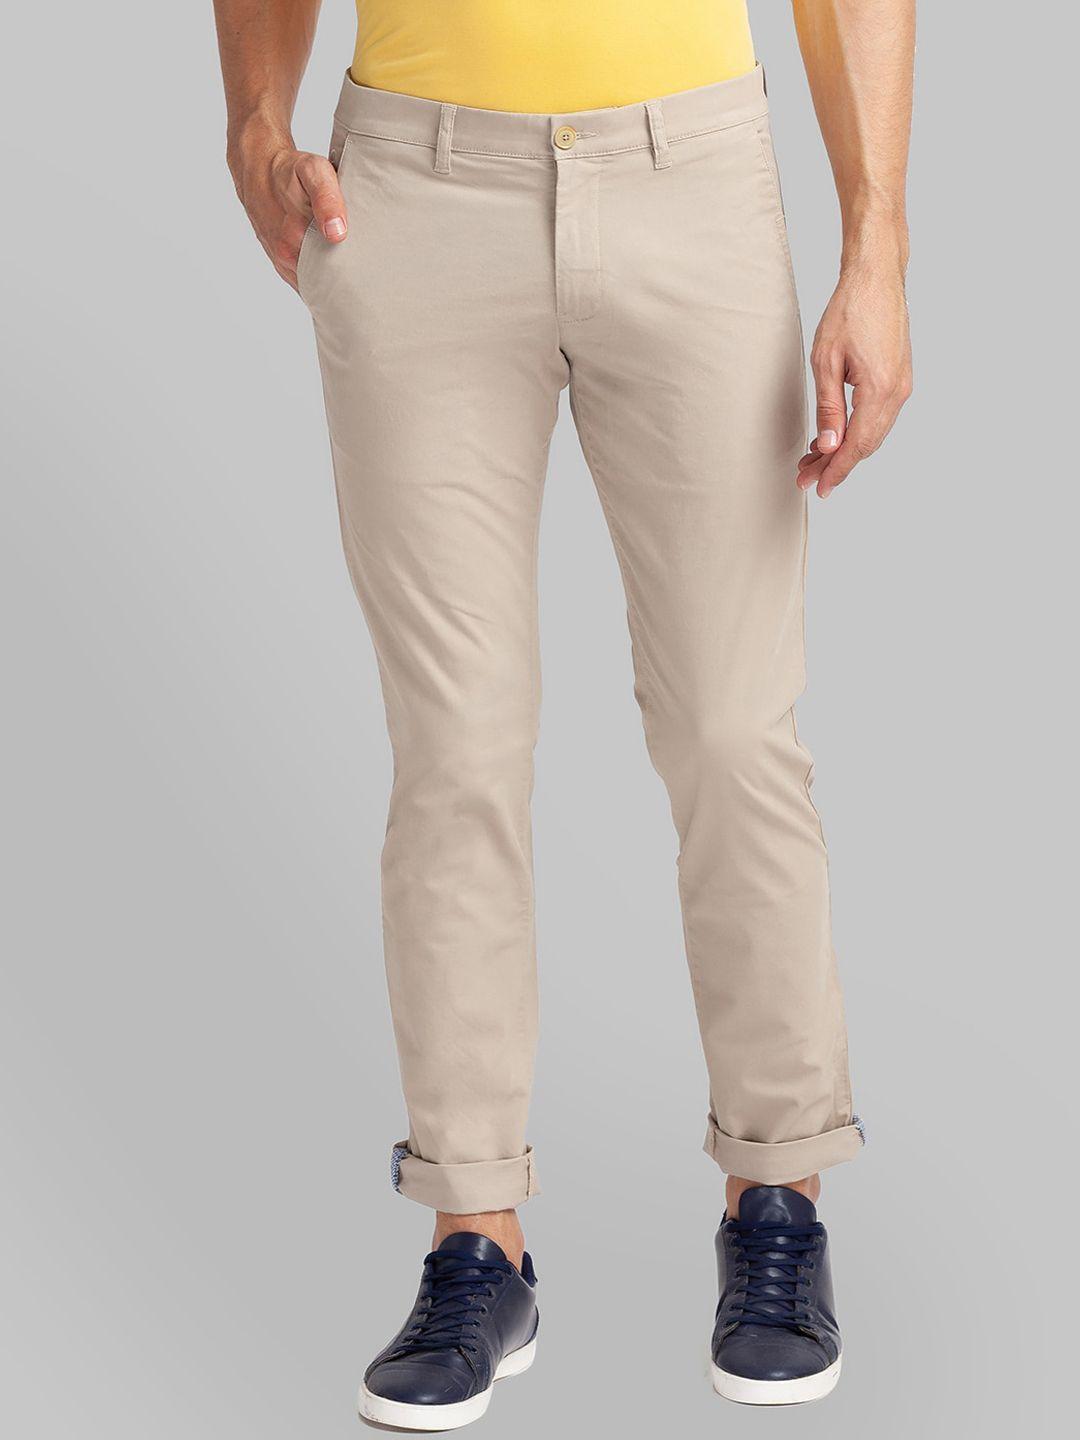 parx-men-grey-tapered-fit-trousers